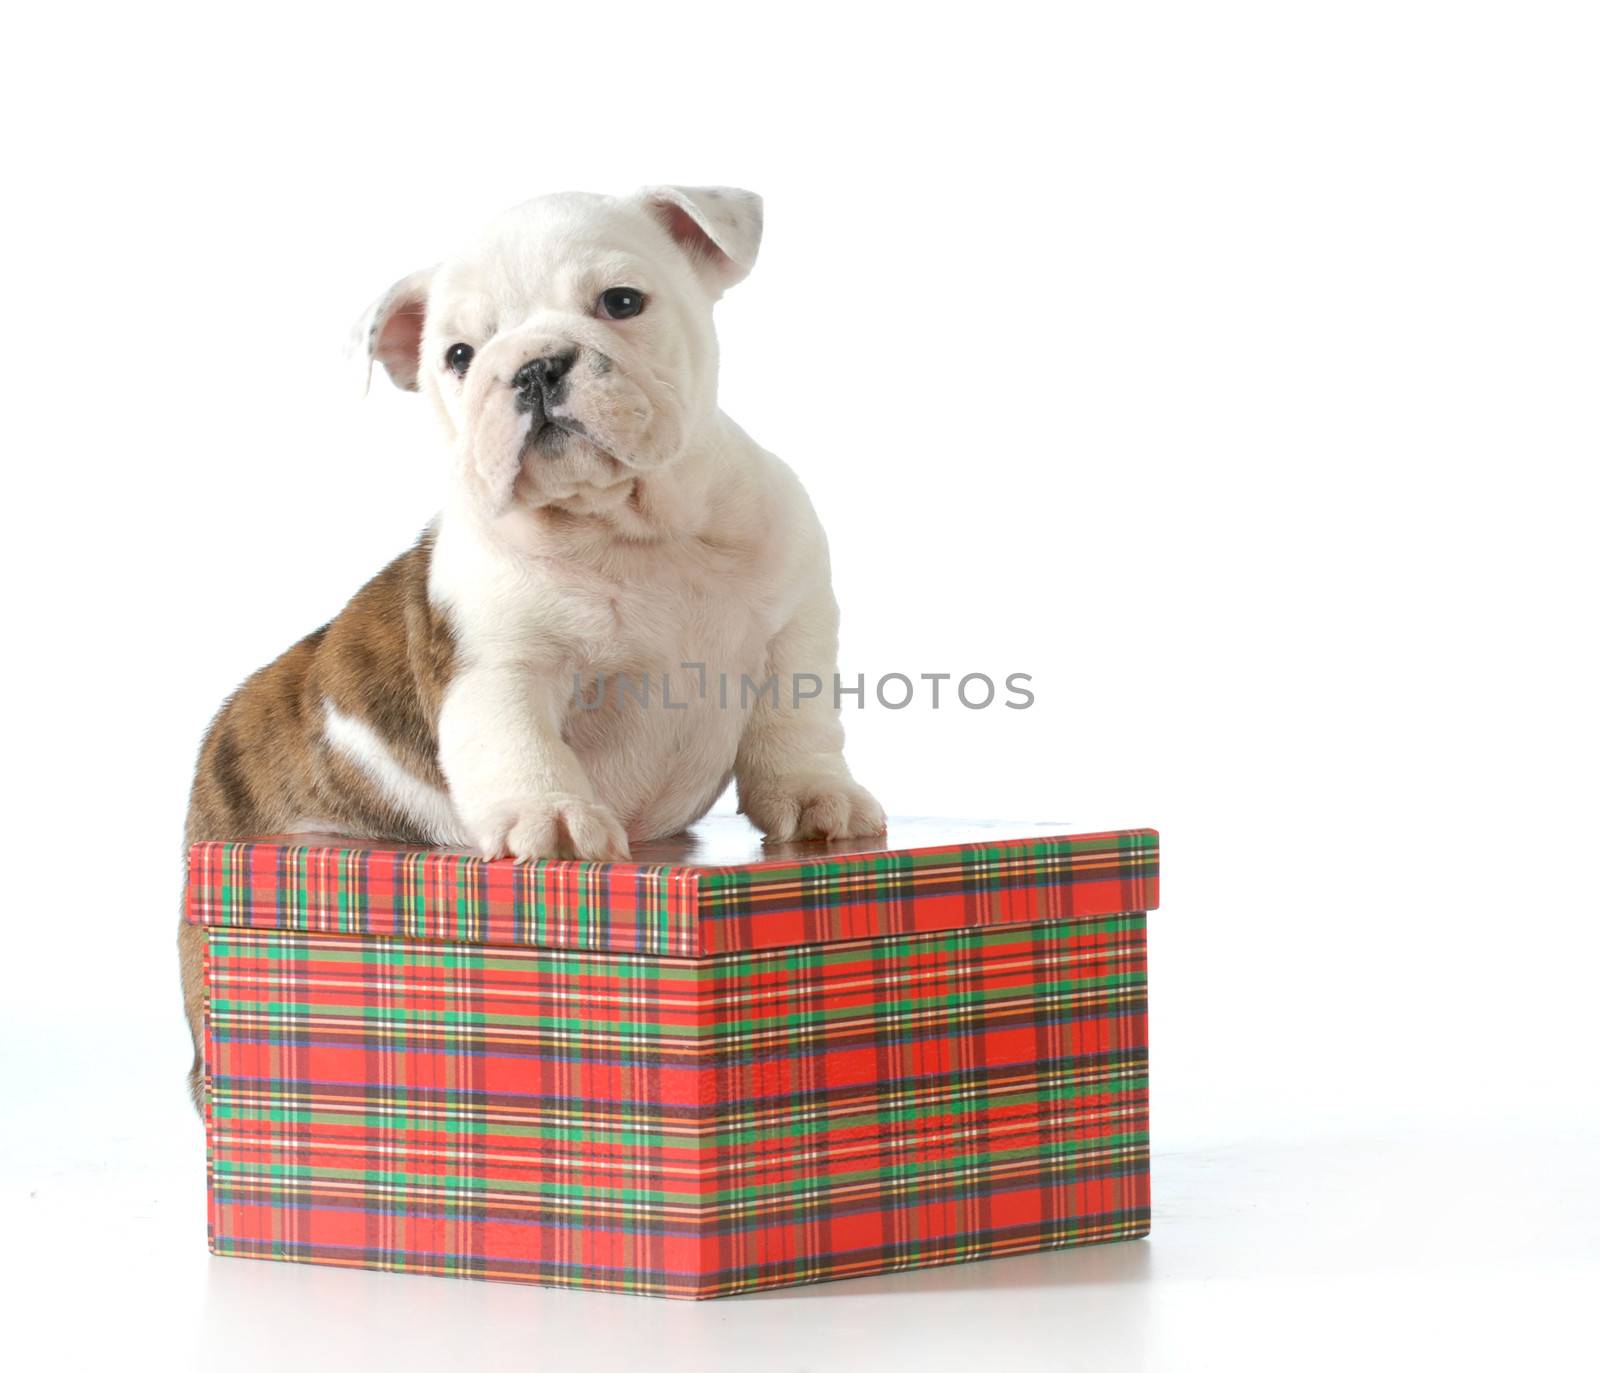 puppy present - english bulldog puppy standing on a christmas gift basket isolated in white background - 7 weeks old